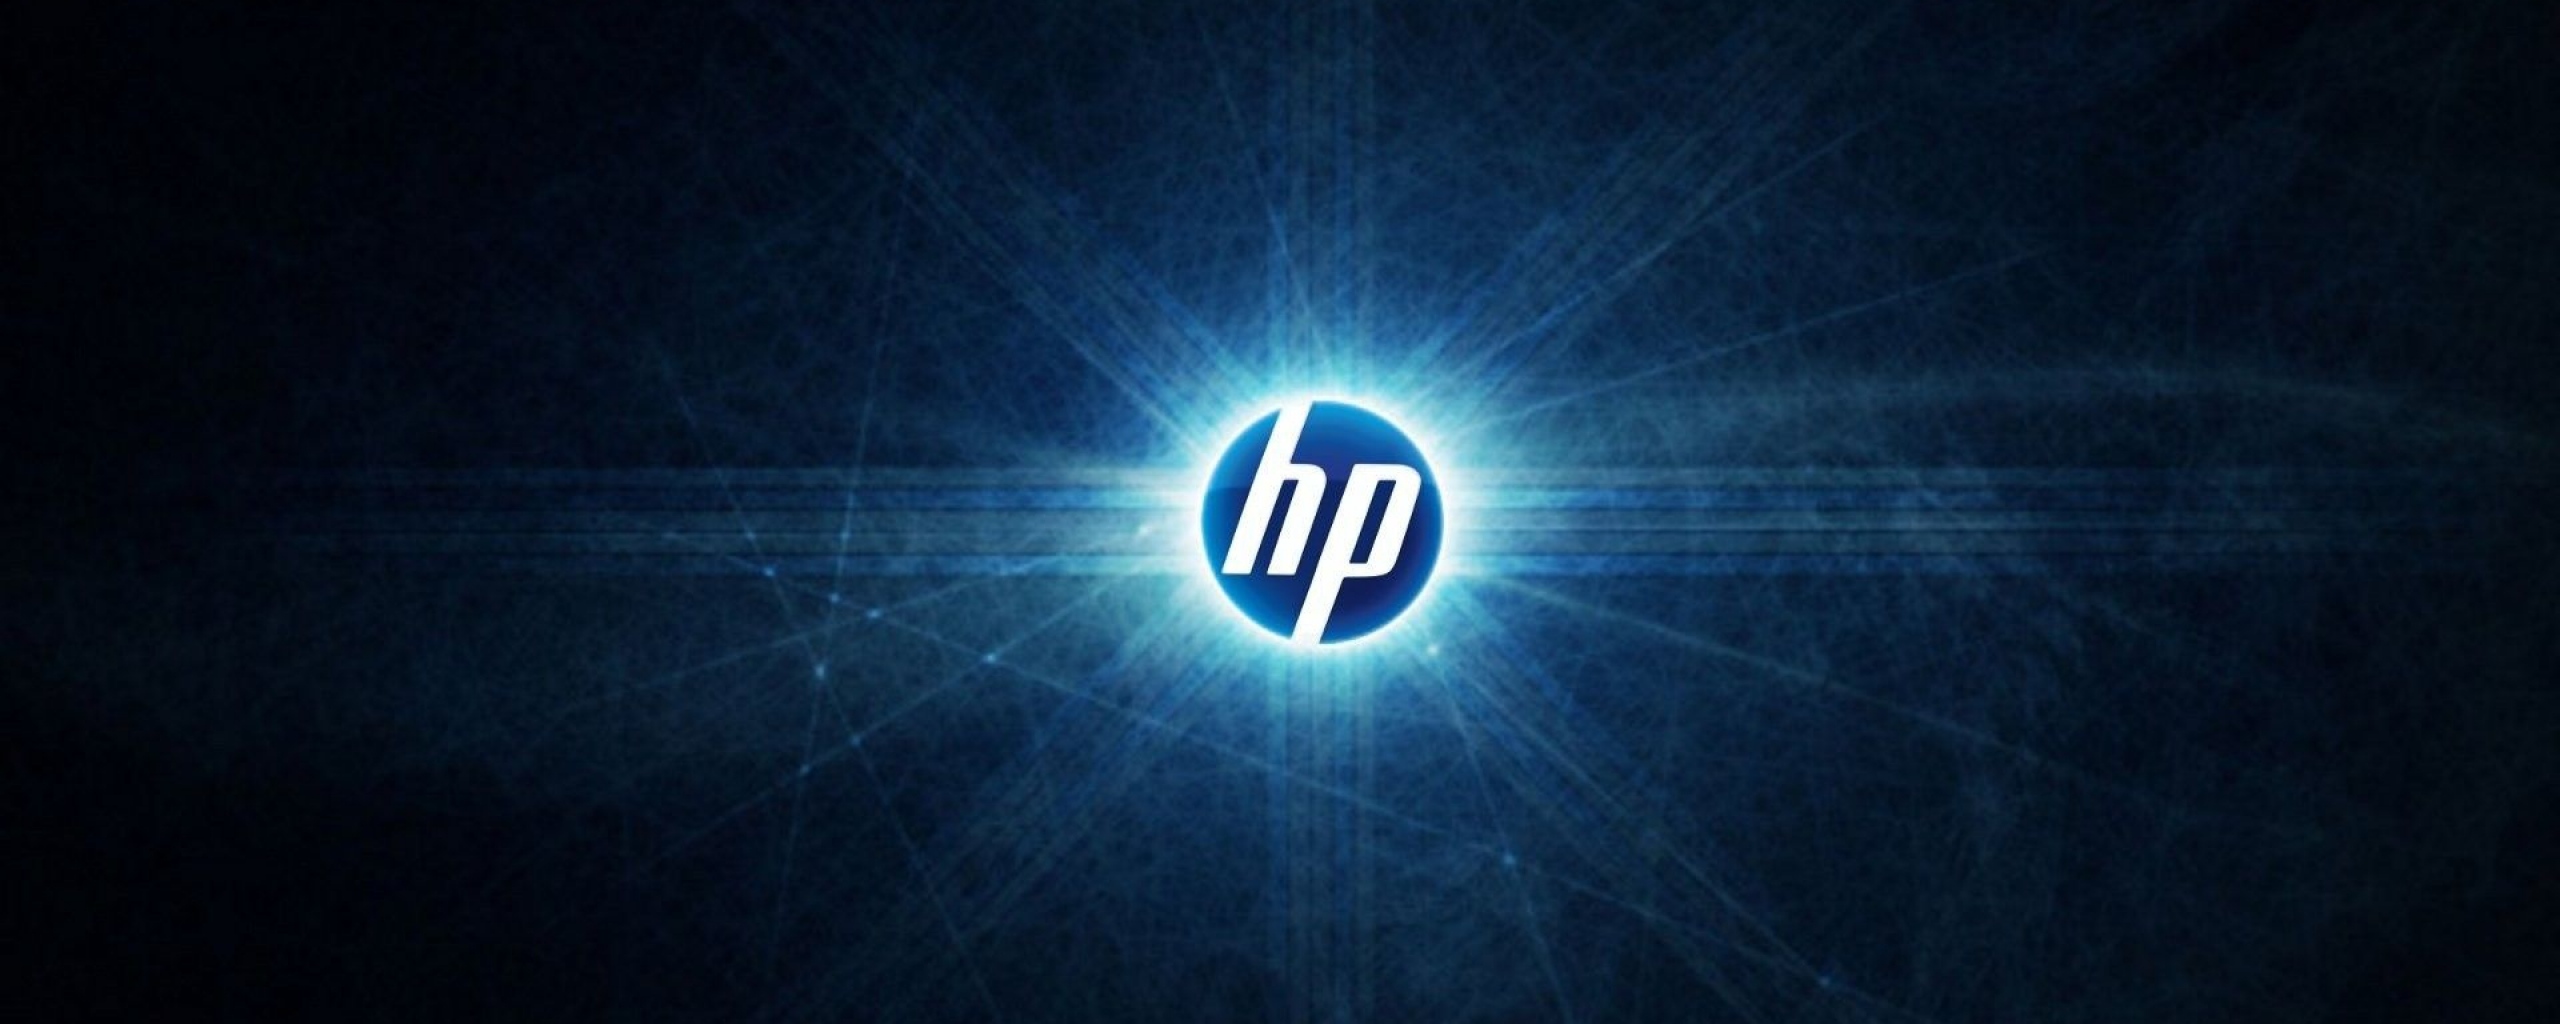  Hp Logo Abstract Wallpaper Background Dual Monitor Resolution